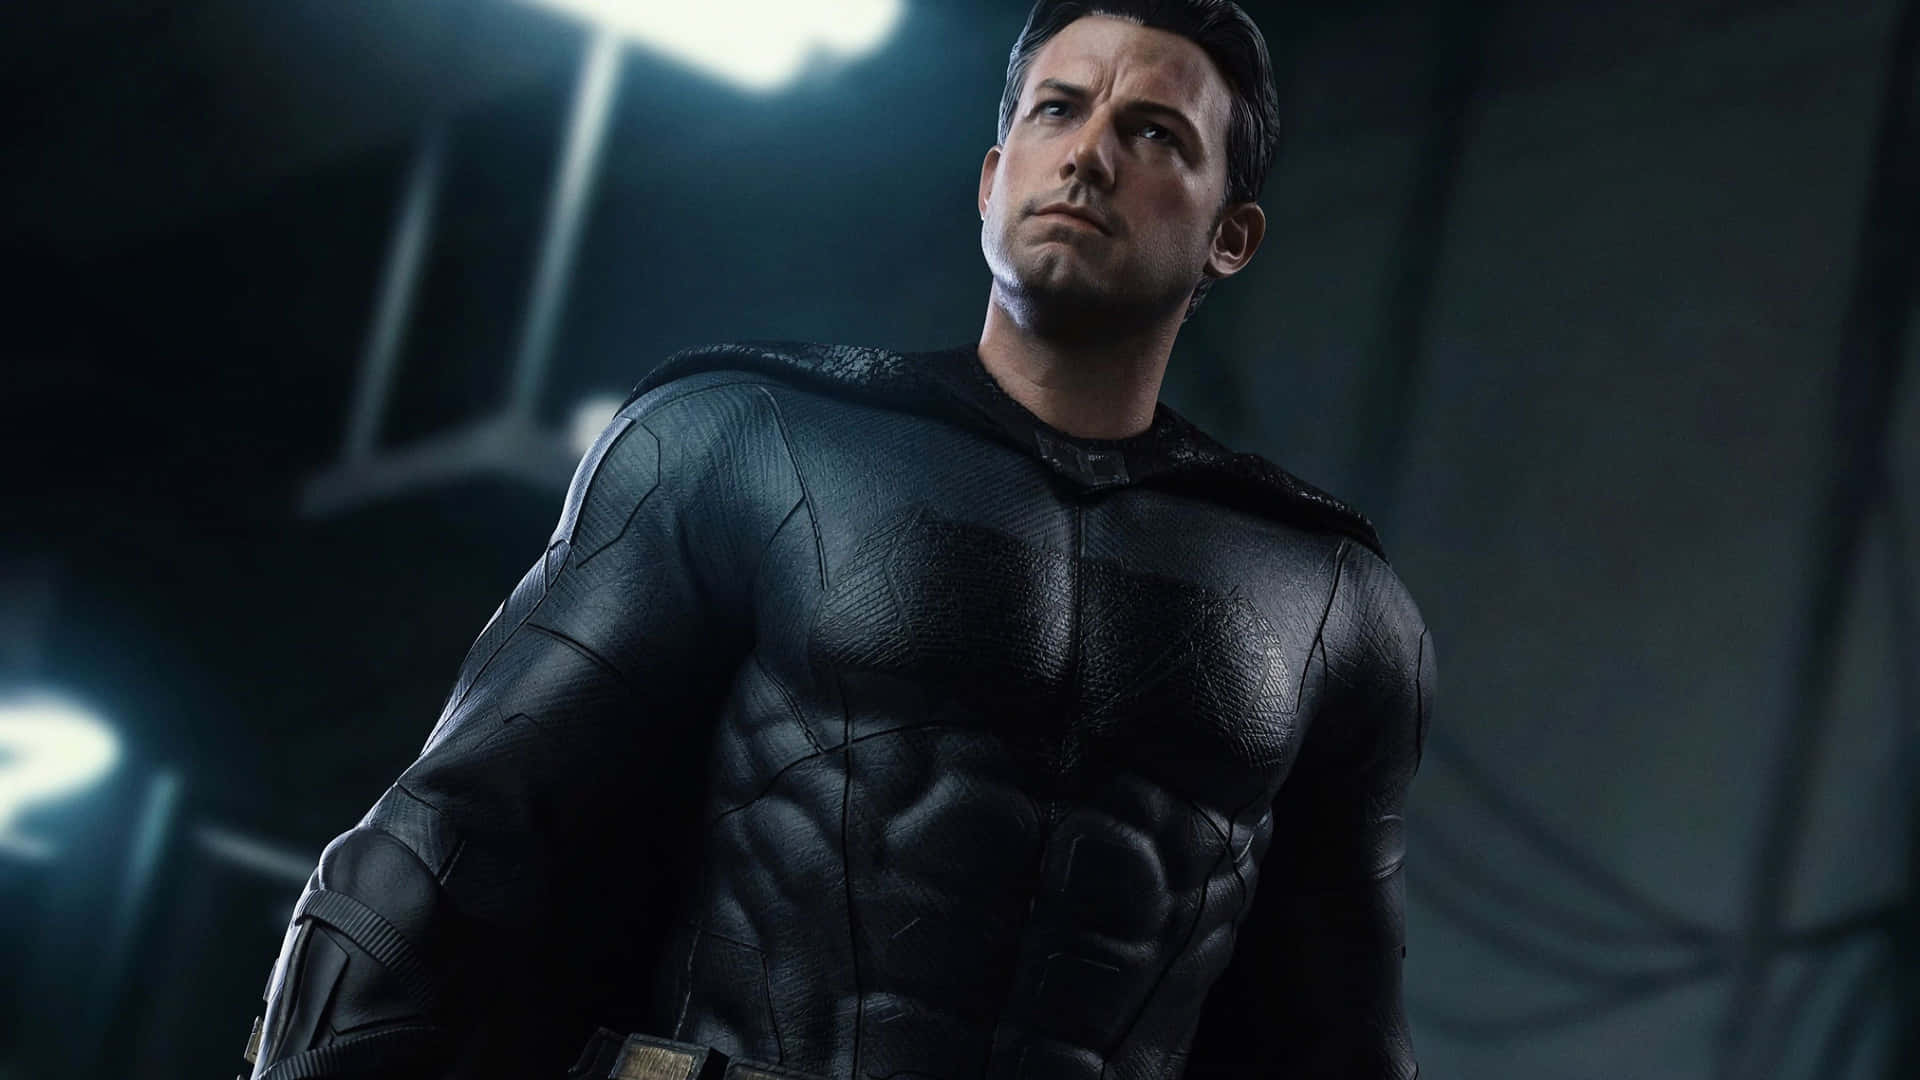 Ben Affleck looking intense in a black and gray ensemble